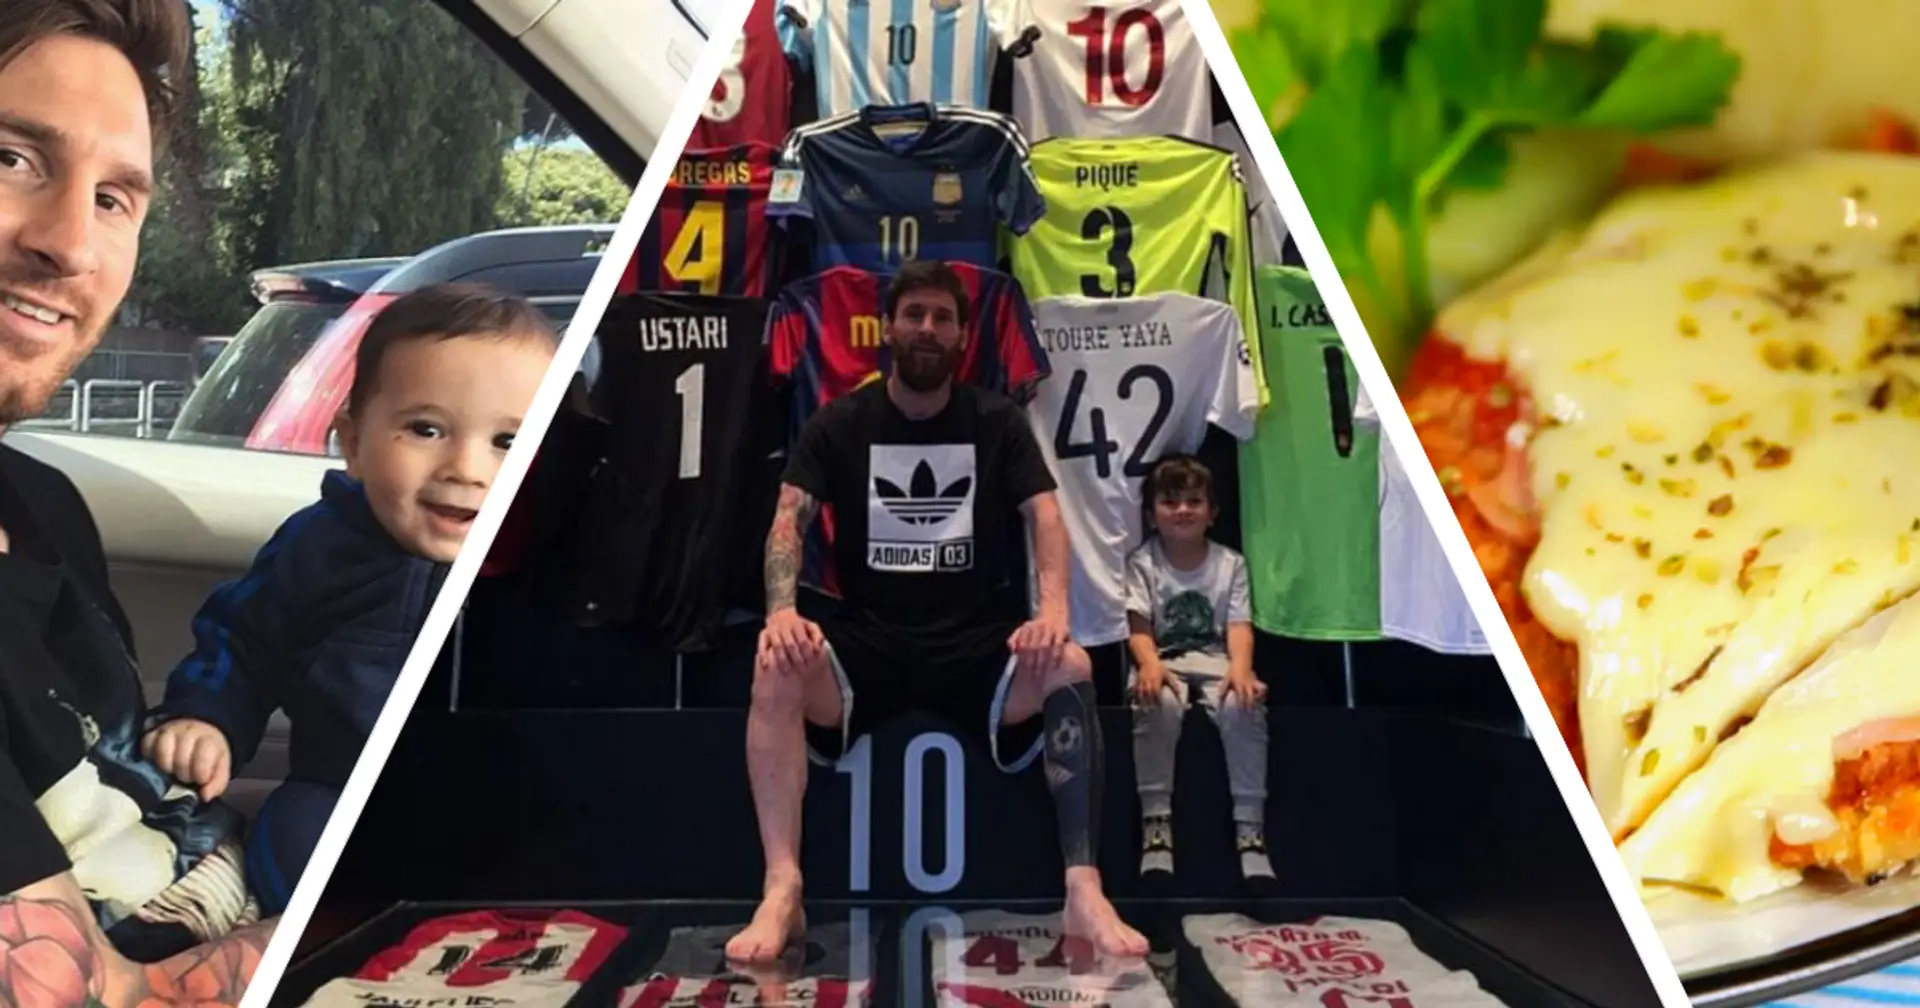 Keeping up with Messi - A look at 7 likely things the Barcelona star is doing in quarantine 